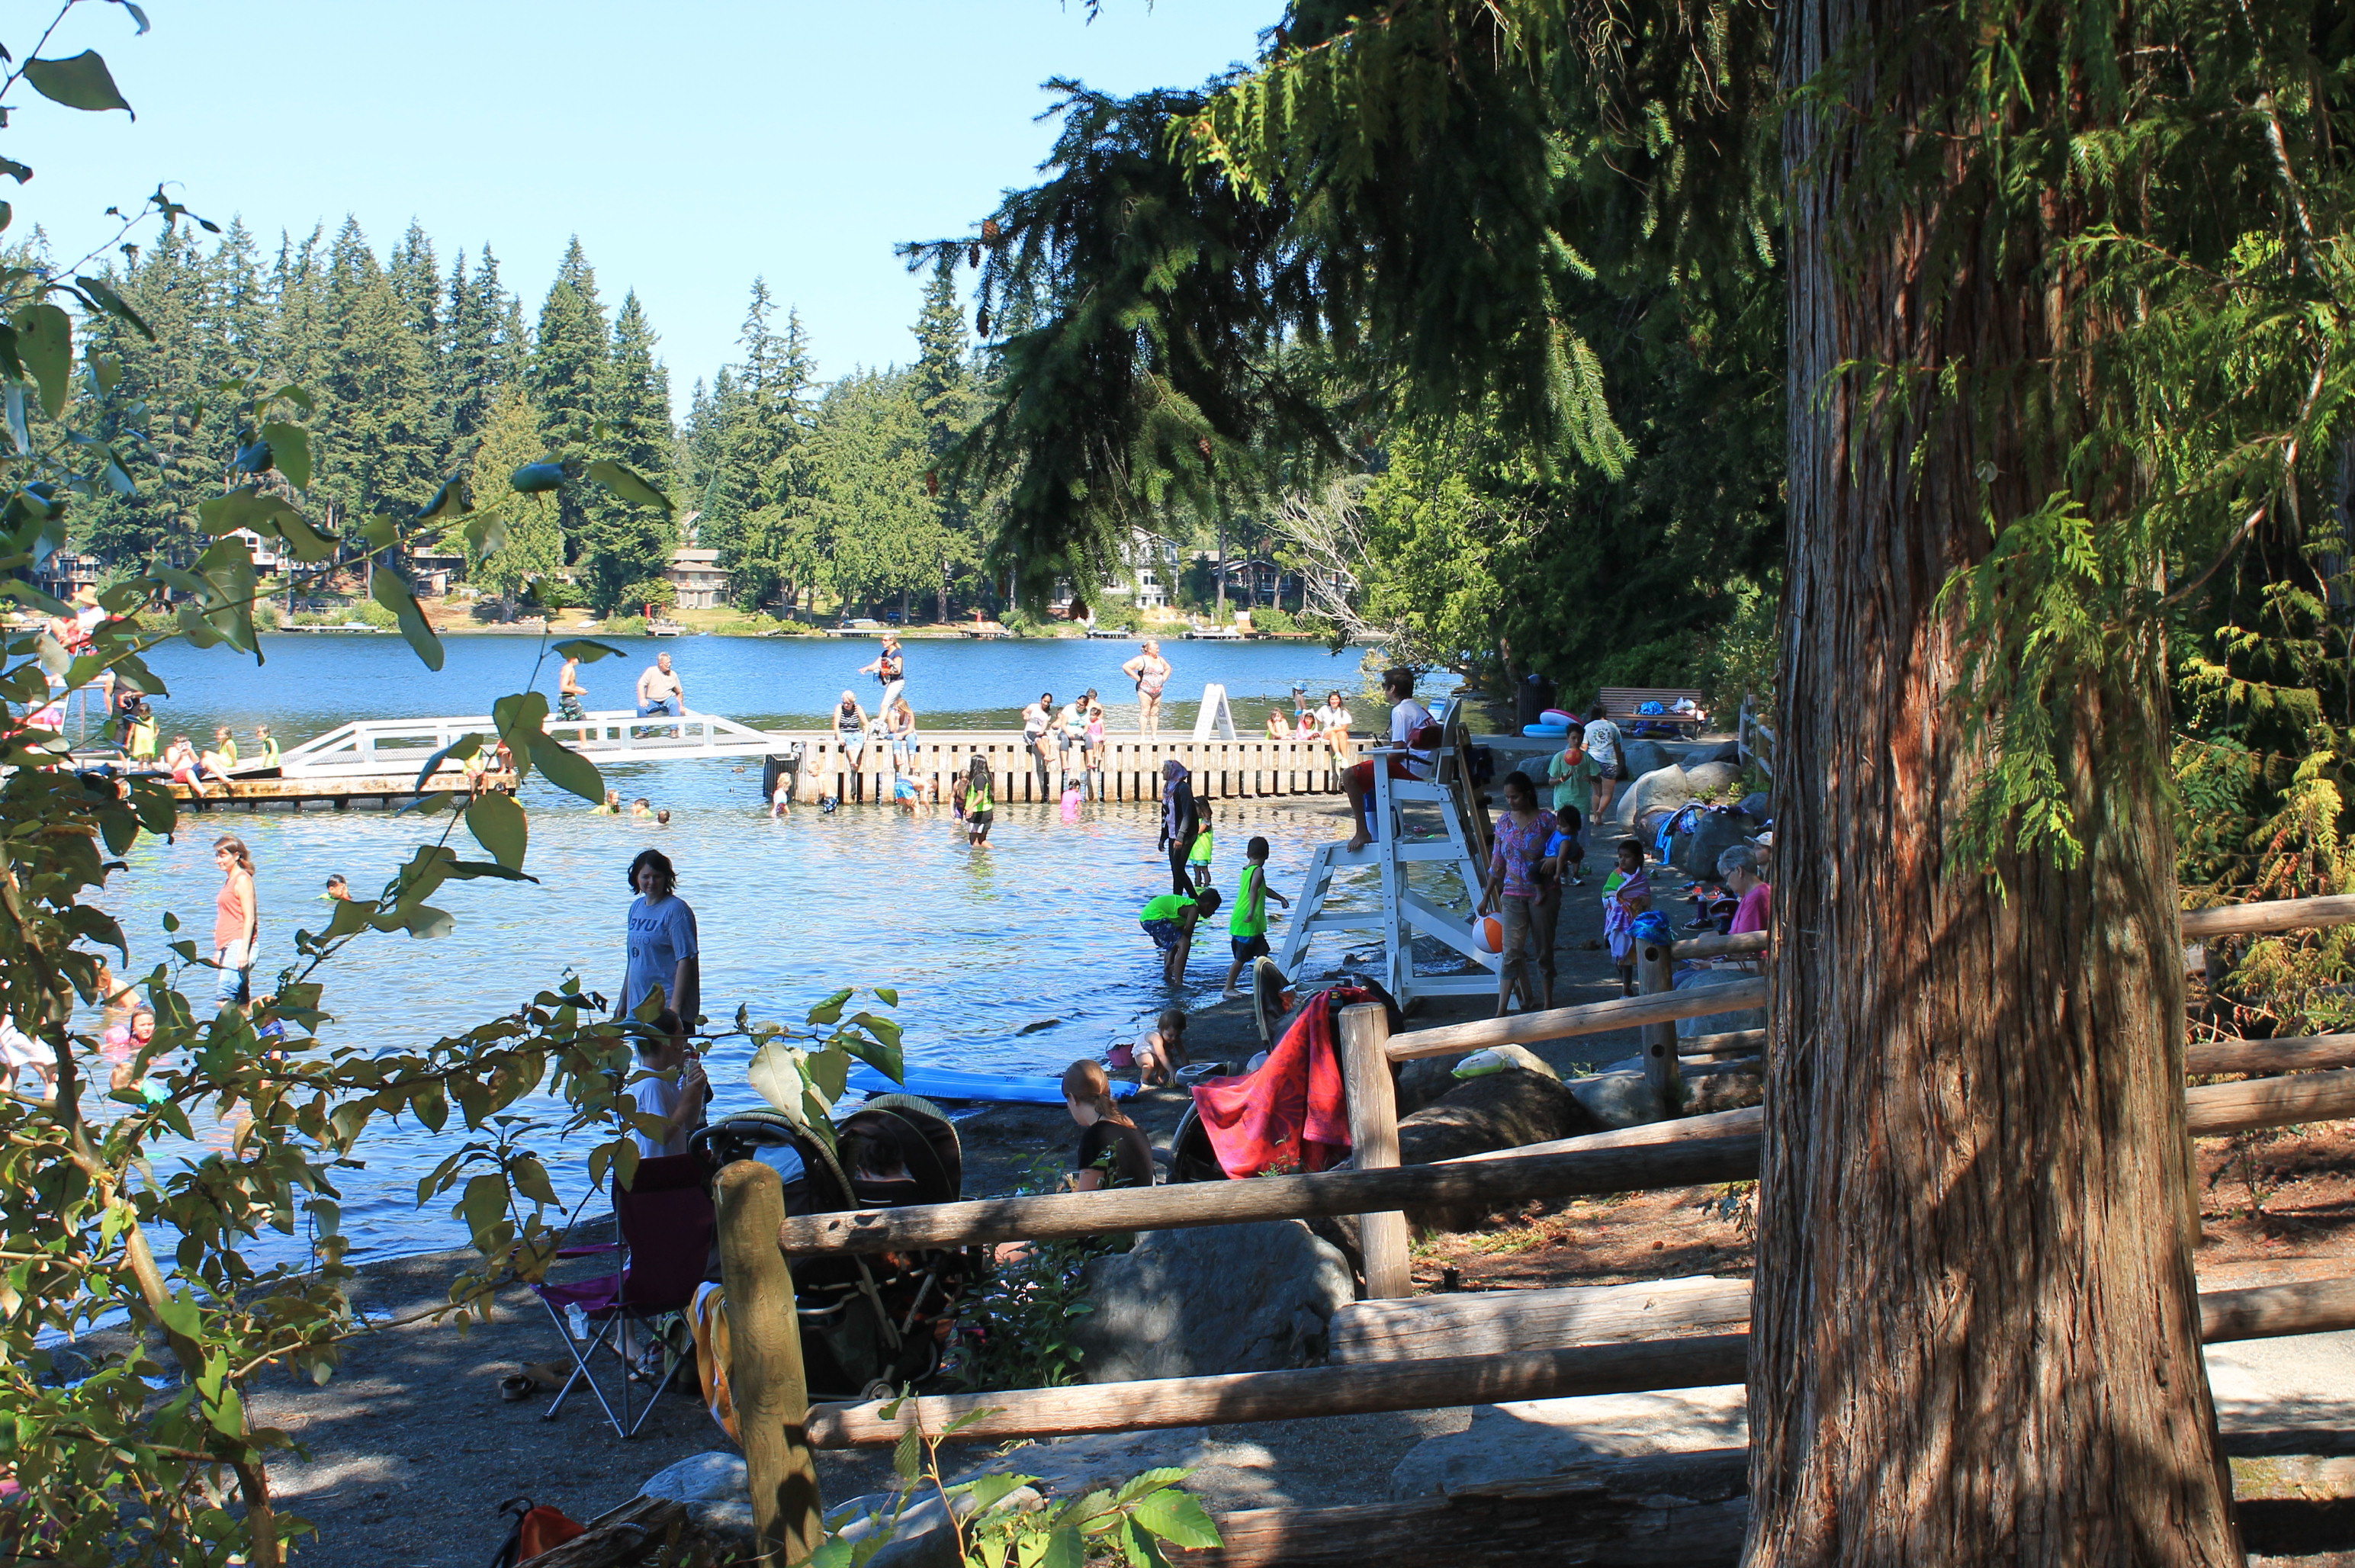 Sunny day at one of Sammamish's lakes with children and adults enjoying the water.